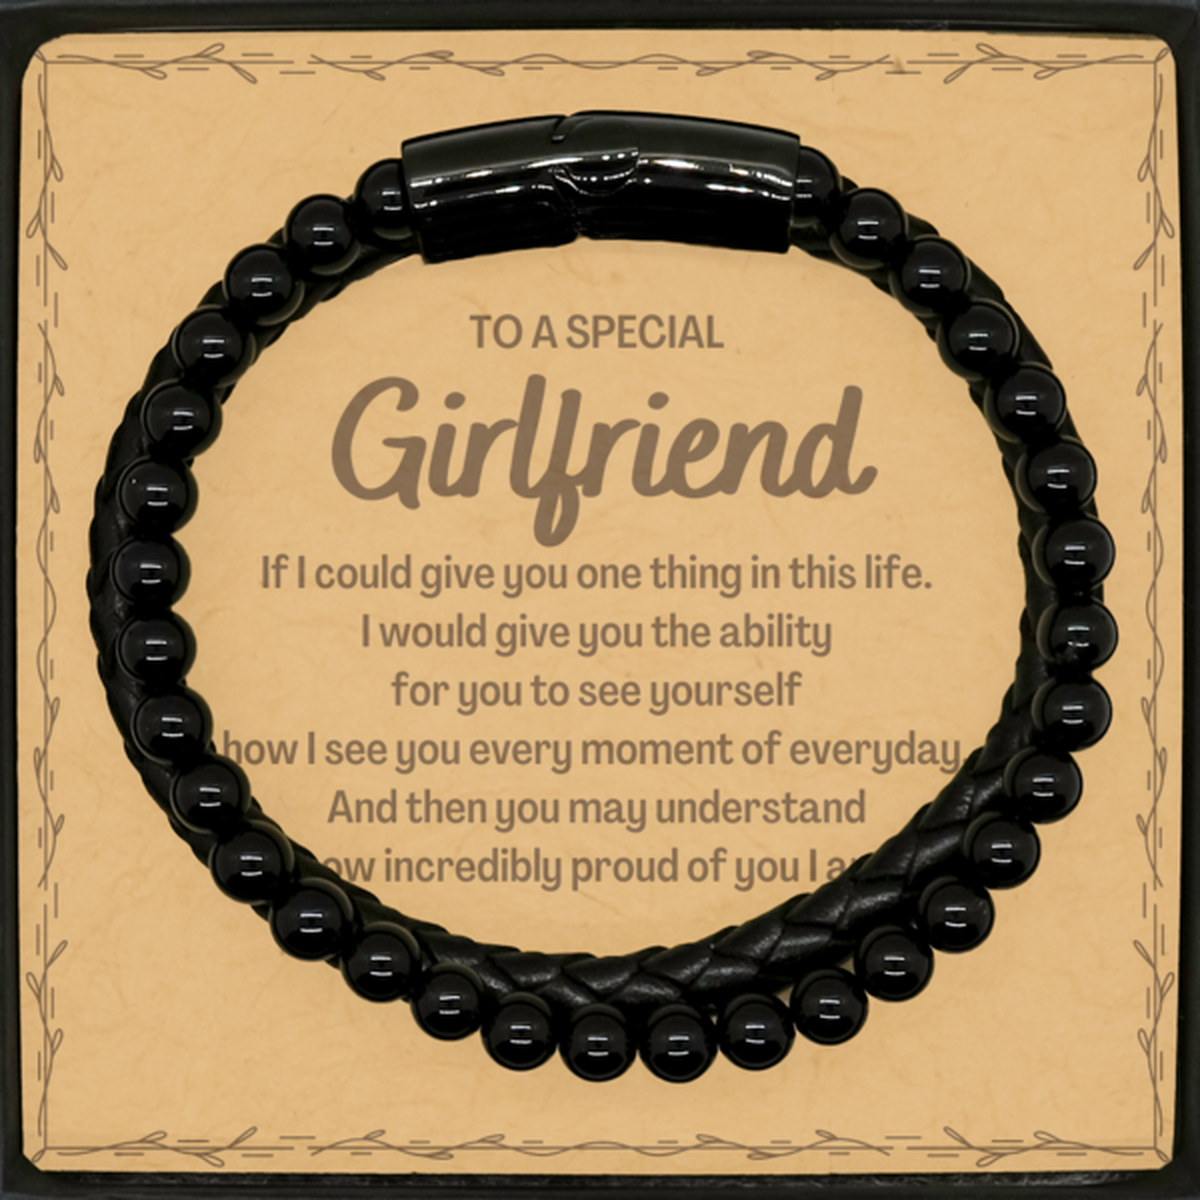 To My Girlfriend Stone Leather Bracelets, Gifts For Girlfriend Message Card, Inspirational Gifts for Christmas Birthday, Epic Gifts for Girlfriend To A Special Girlfriend how incredibly proud of you I am